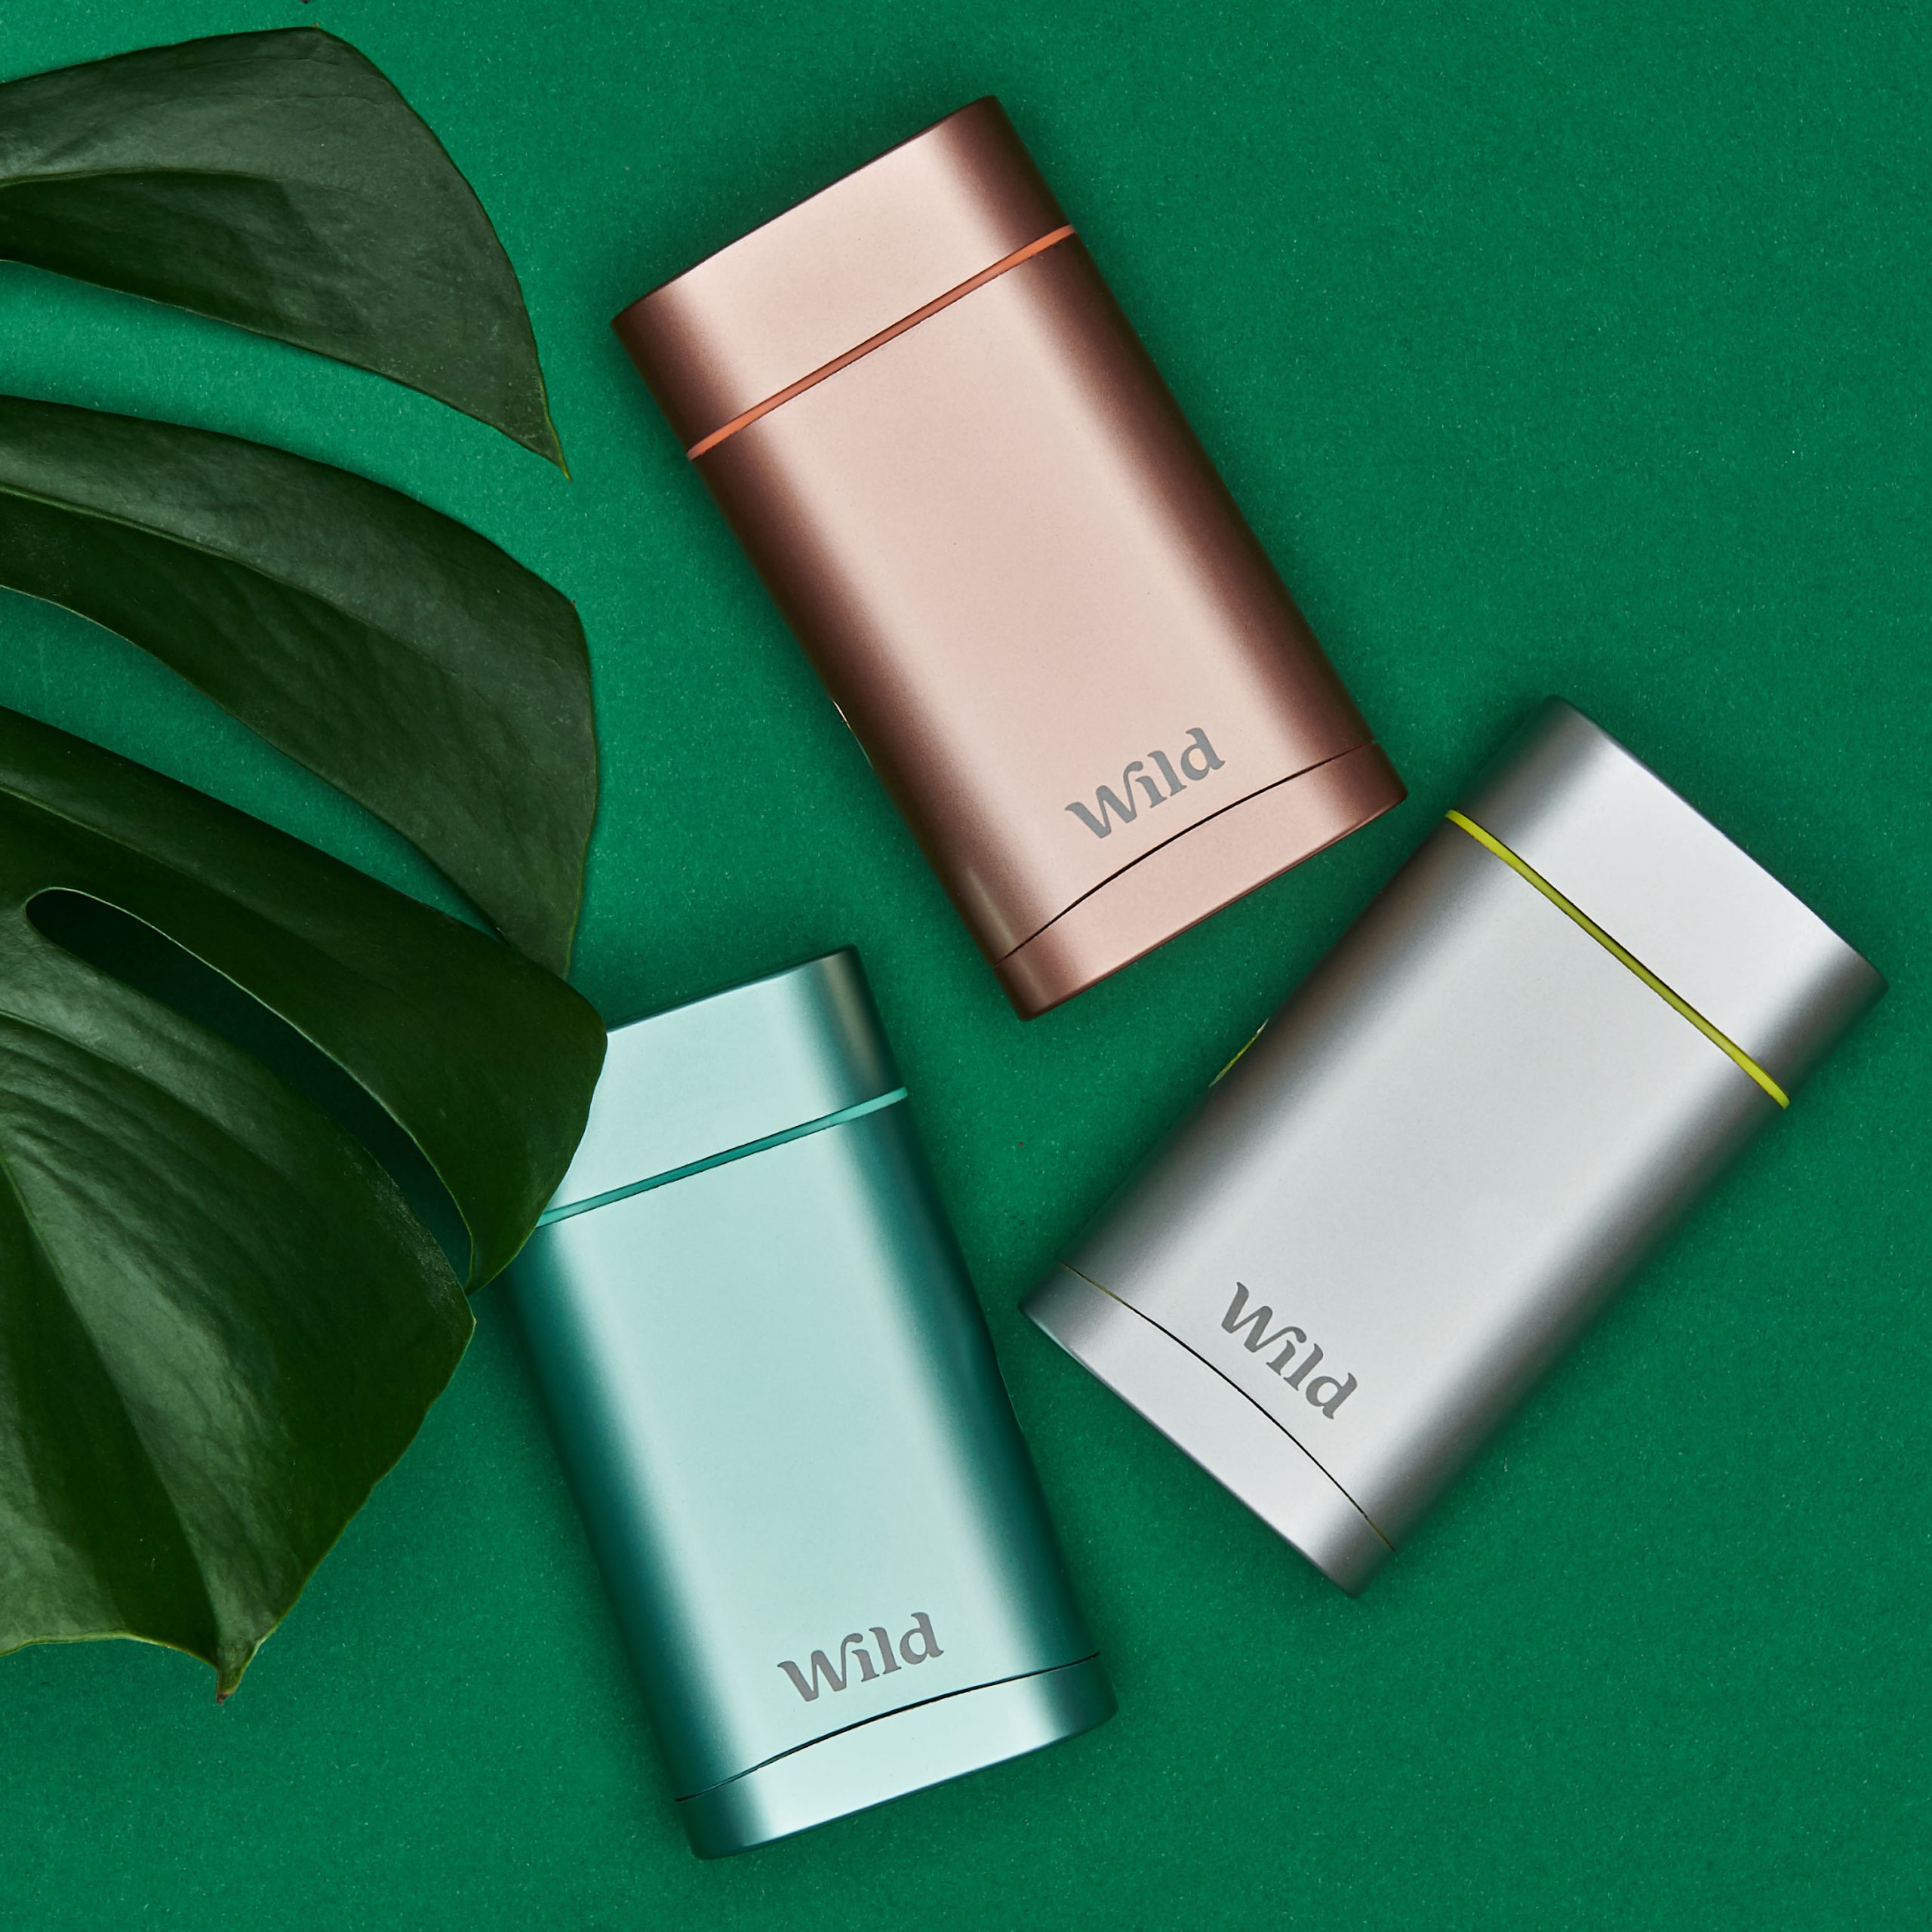 A Fully Sustainable Refillable Deodorant: Wild Promotes Eco-friendly Personal Care Through Innovative Design - World Brand Design Society